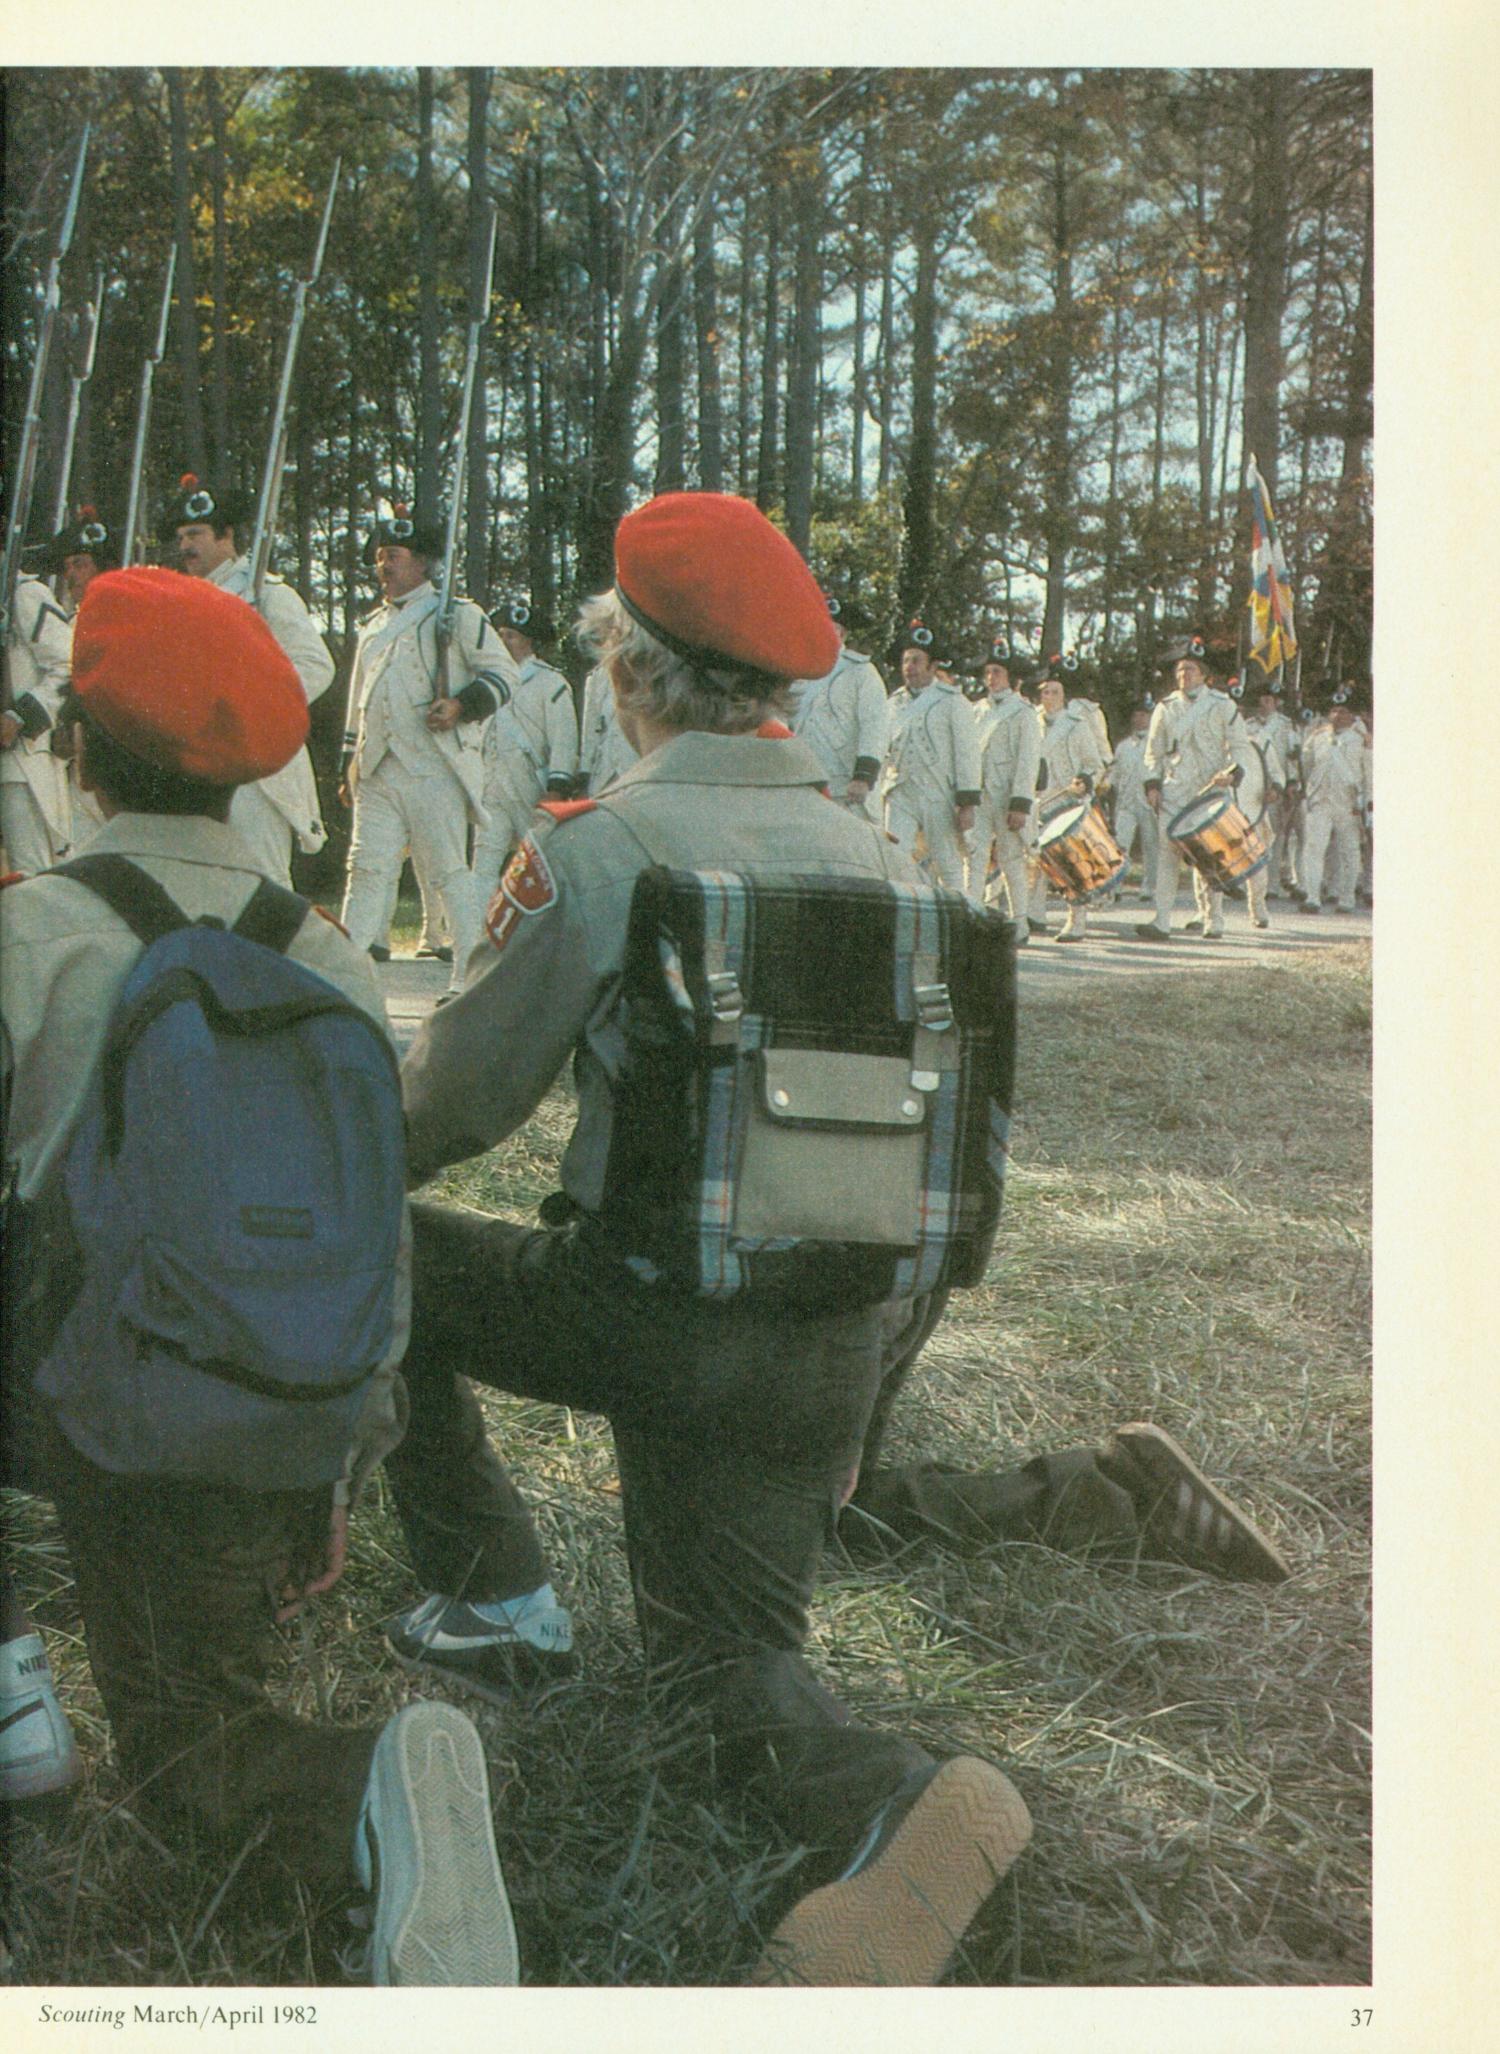 Scouting, Volume 70, Number 2, March-April 1982
                                                
                                                    37
                                                